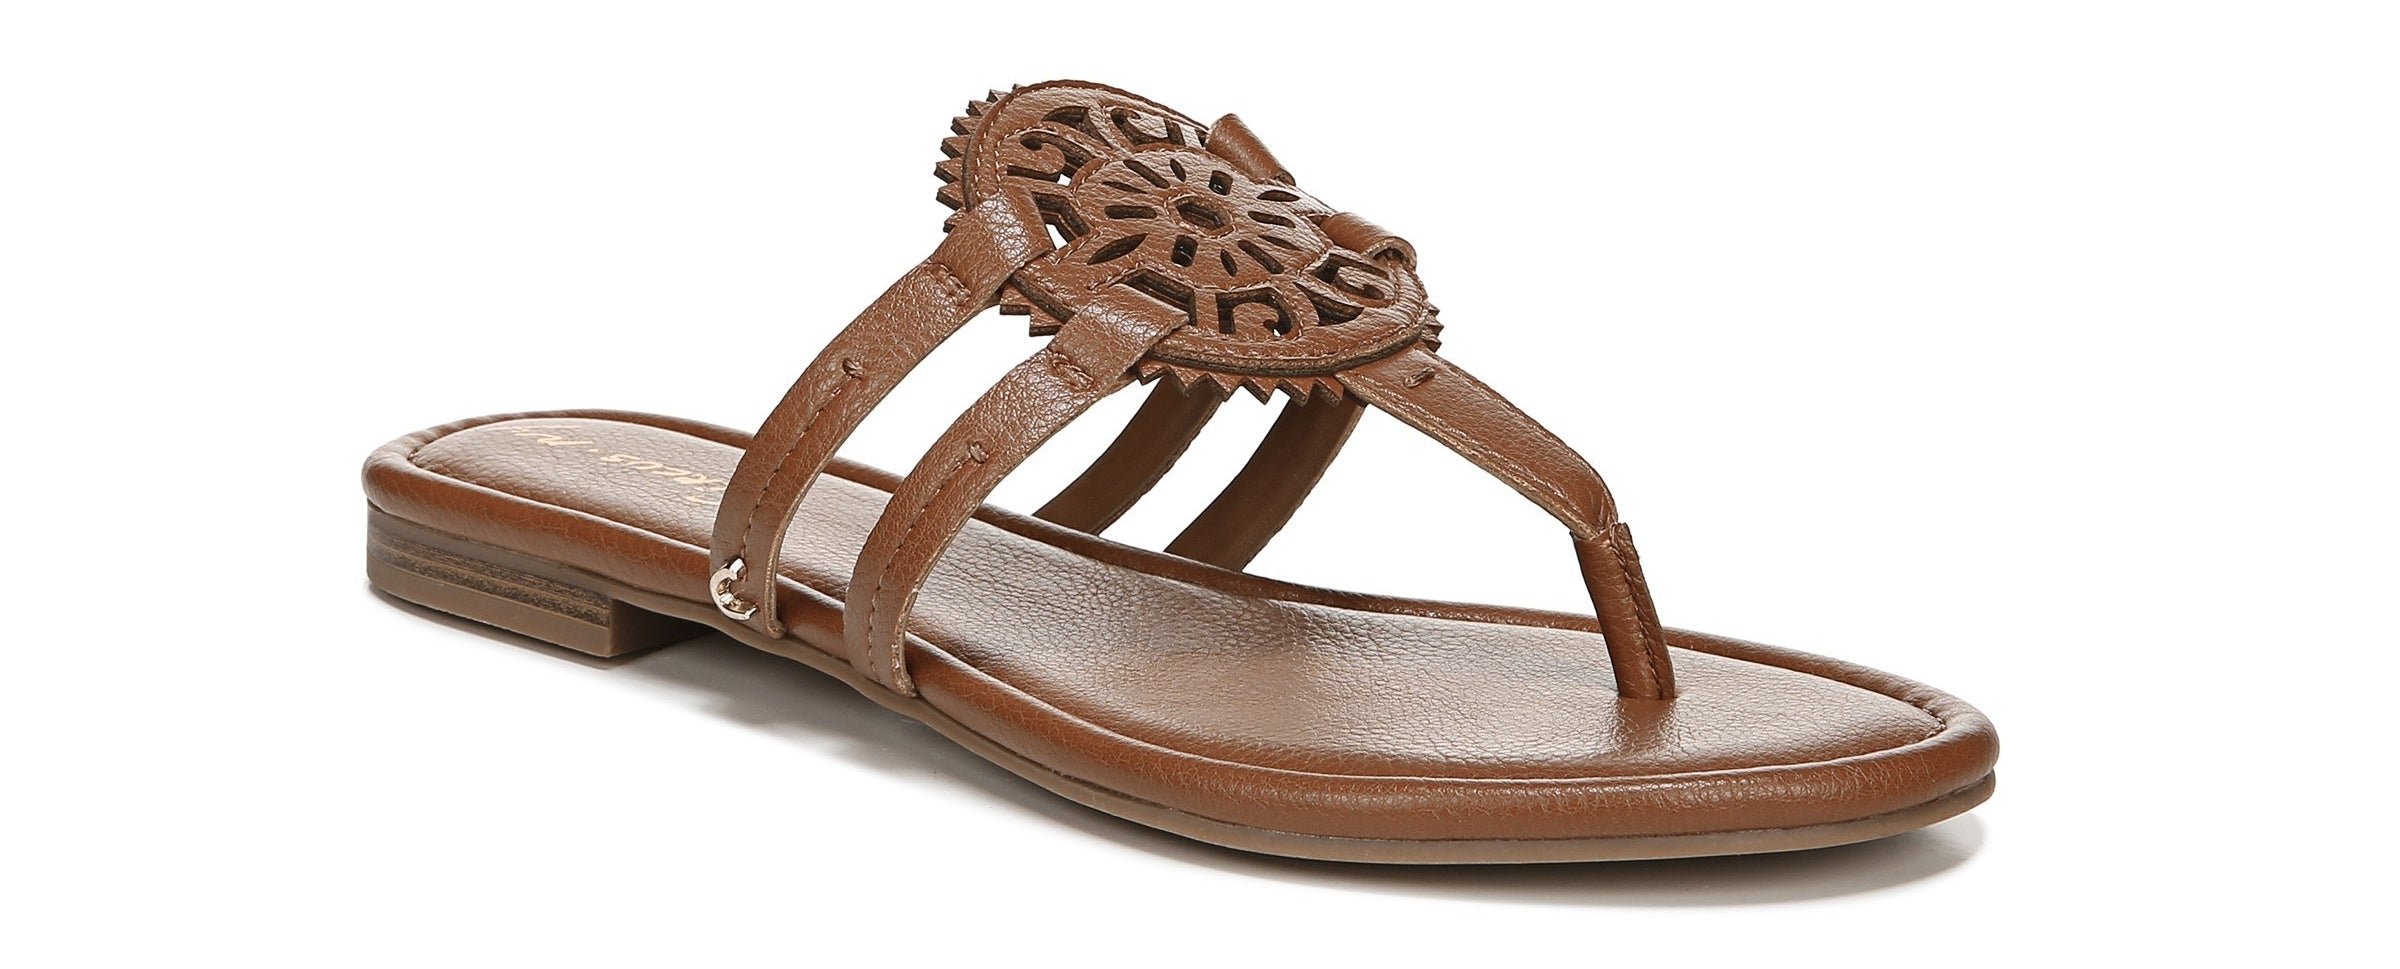 The brown sandals have a medallion pendant and two straps